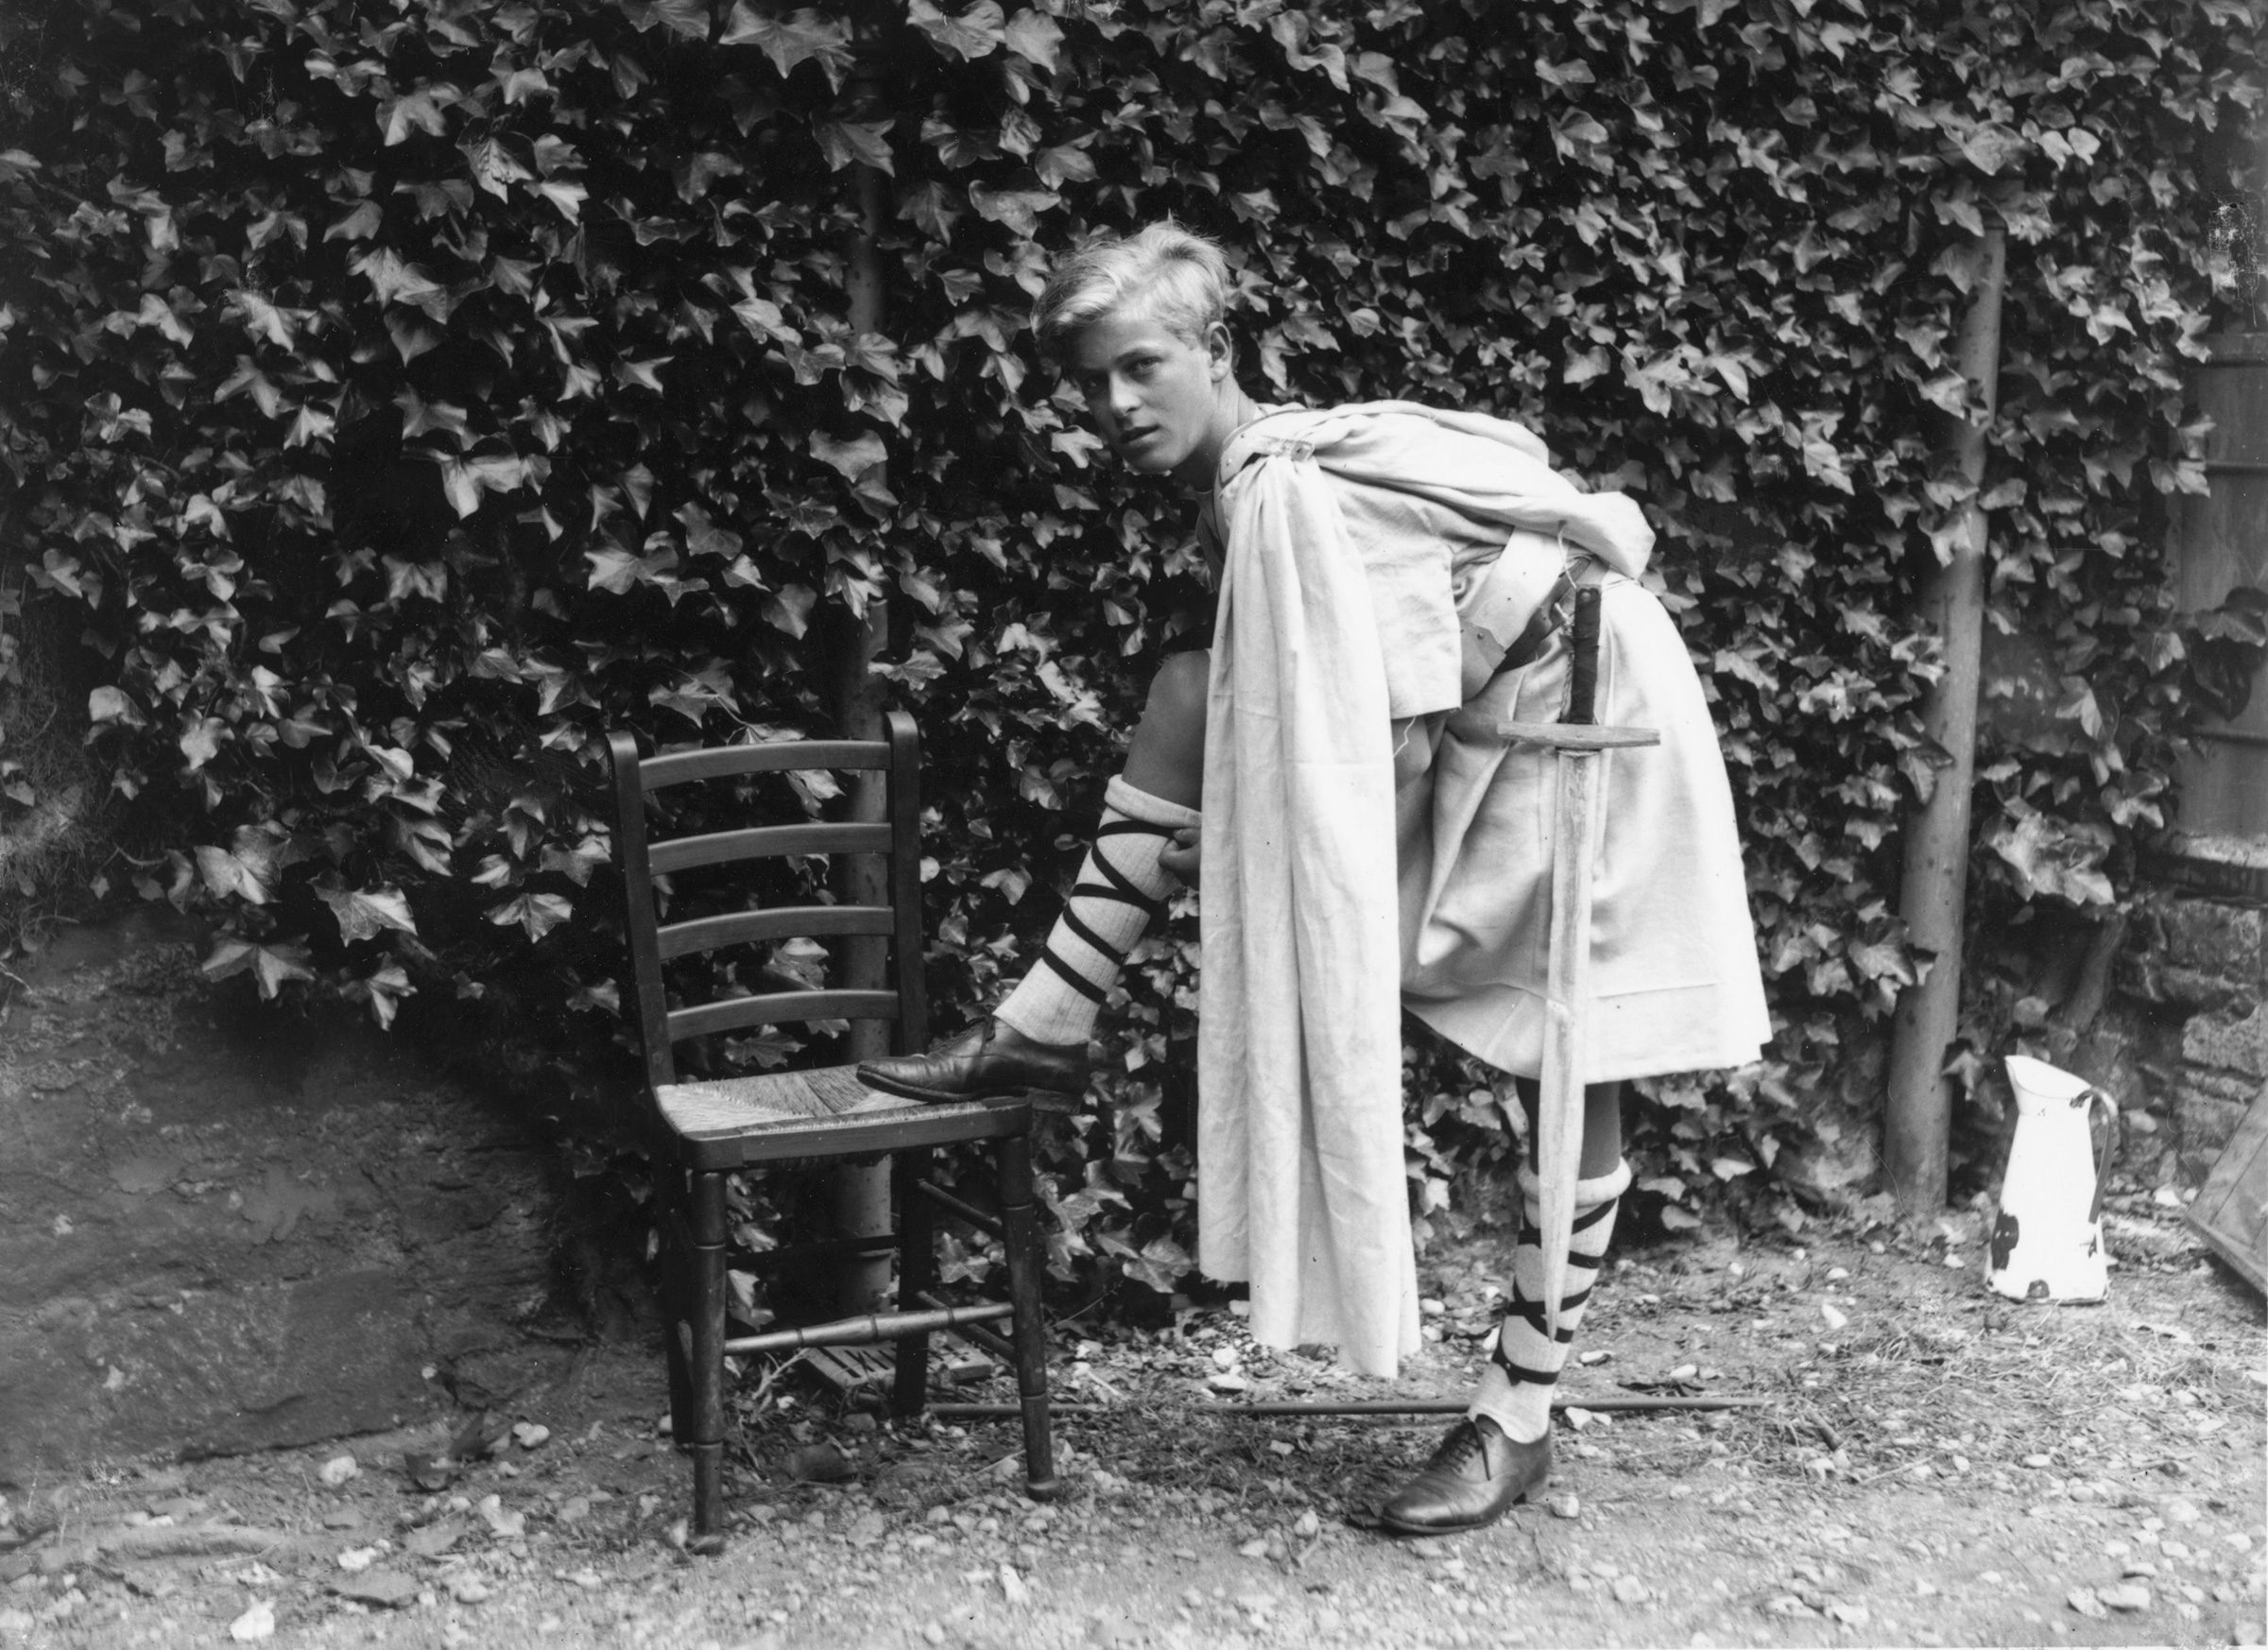 Prince Philip of Greece dressed for the Gordonstoun School's production of 'MacBeth', in Scotland, July 1935.